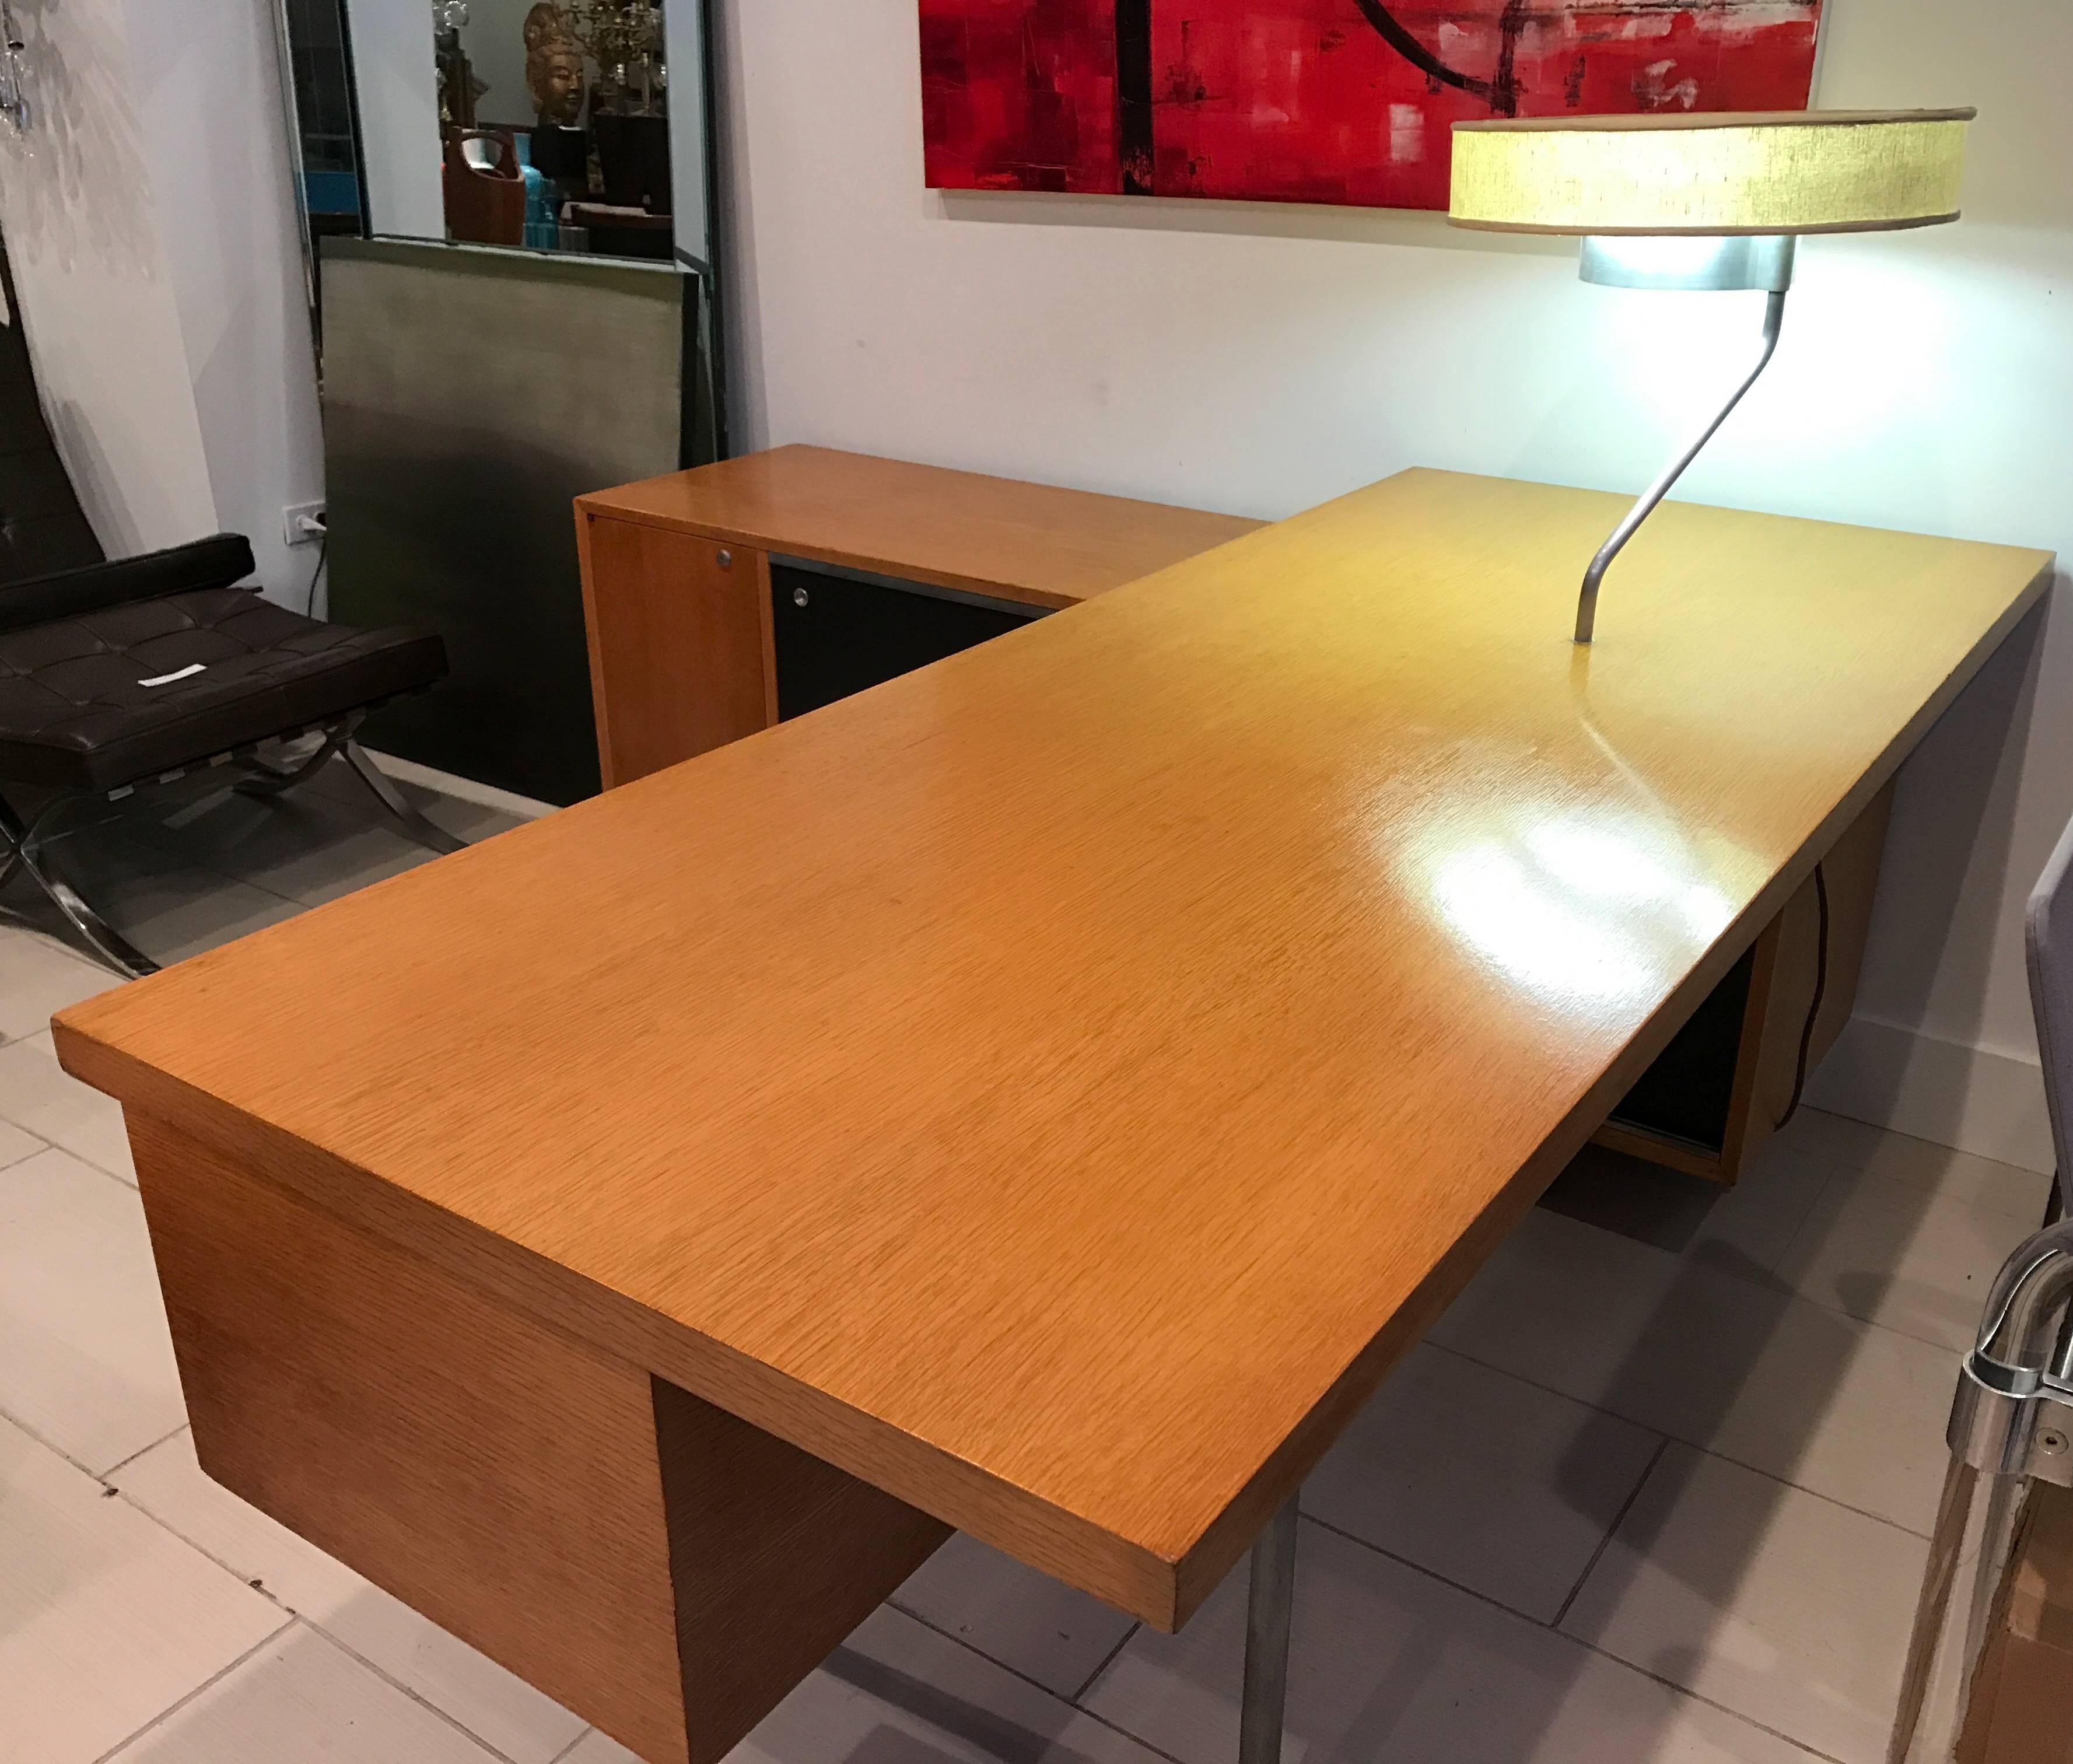 Exceptional George Nelson Executive Series desk with return credenza and attached desk lamp. Lamp works! Has original shade. The desk is attached to the credenza in an "L" shape. The credenza has access from both sides and features sliding